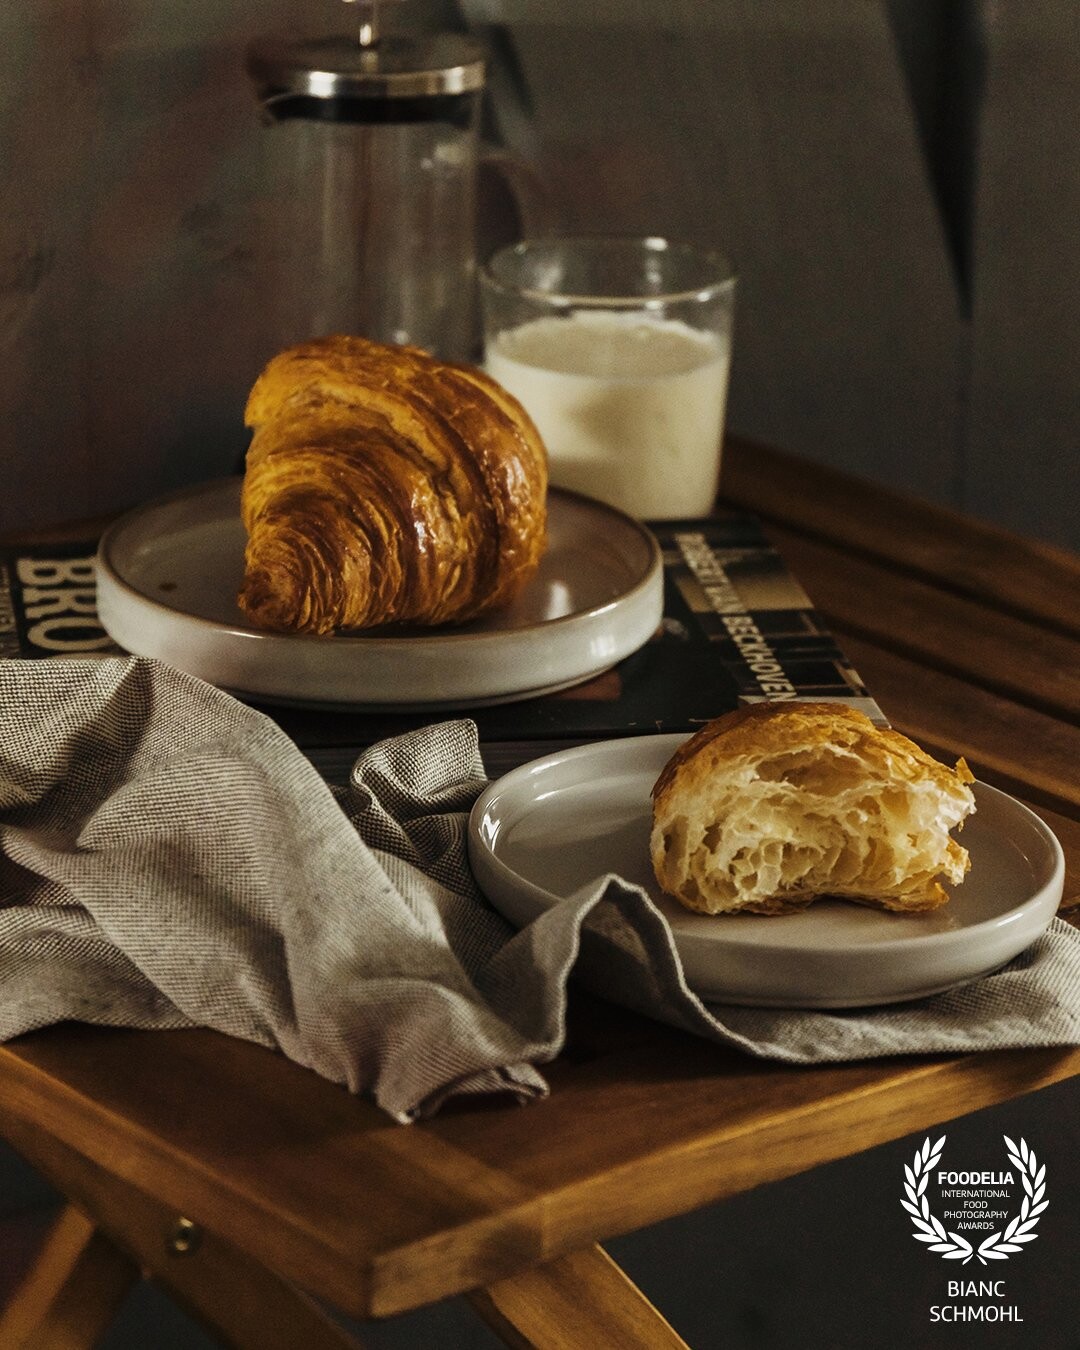 With this photo I raised the bar high for myself: adding as much atmosphere as possible, with only a limited amount of products&props! Even with a 'simple' croissant, one can have an enjoyable breakfast.